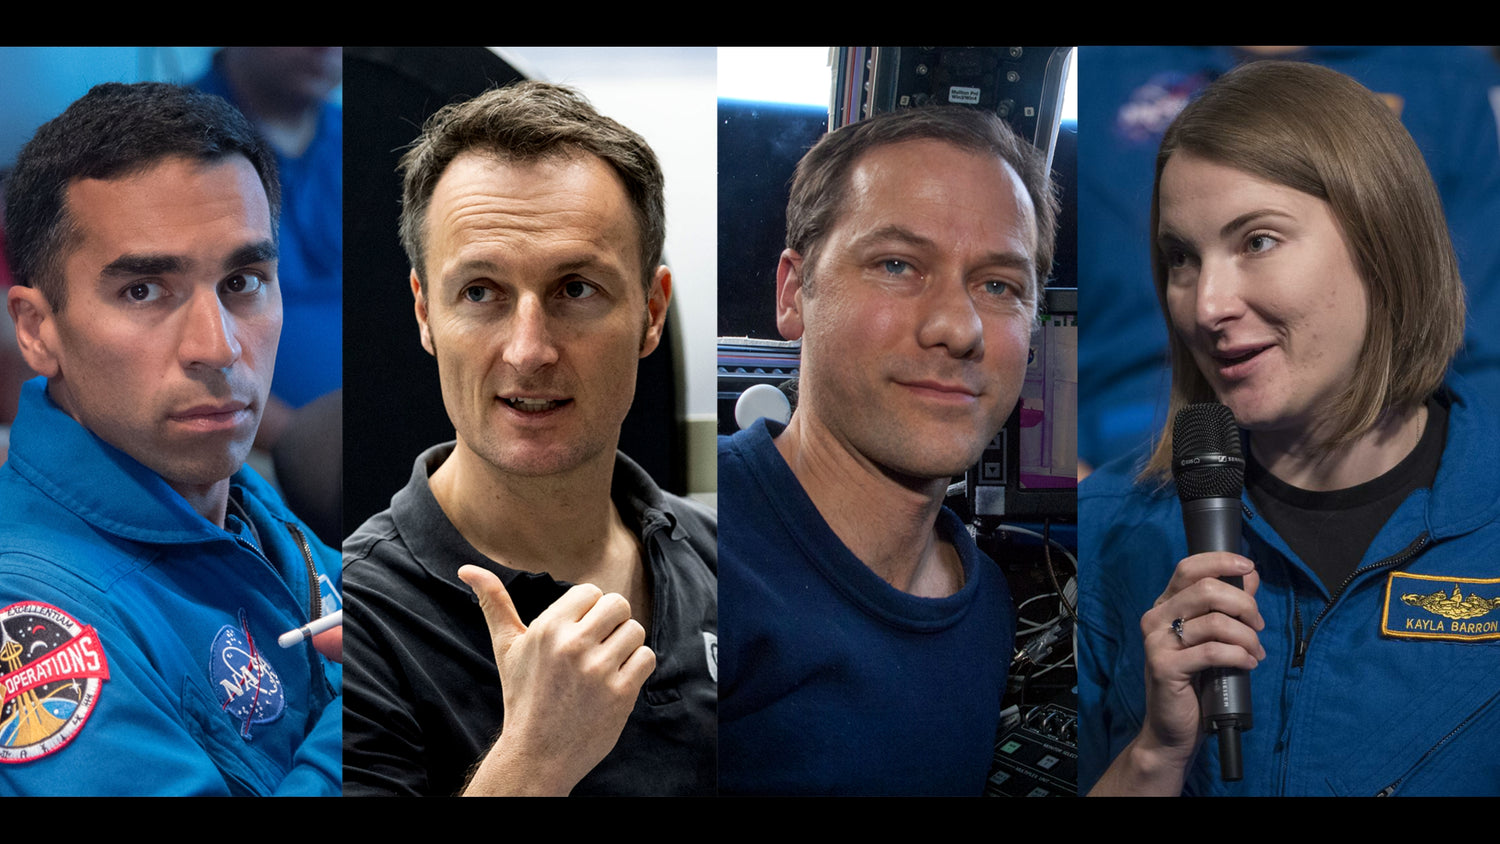 NASA Announces Astronauts Who Will Launch Aboard SpaceX's Crew-3 Mission